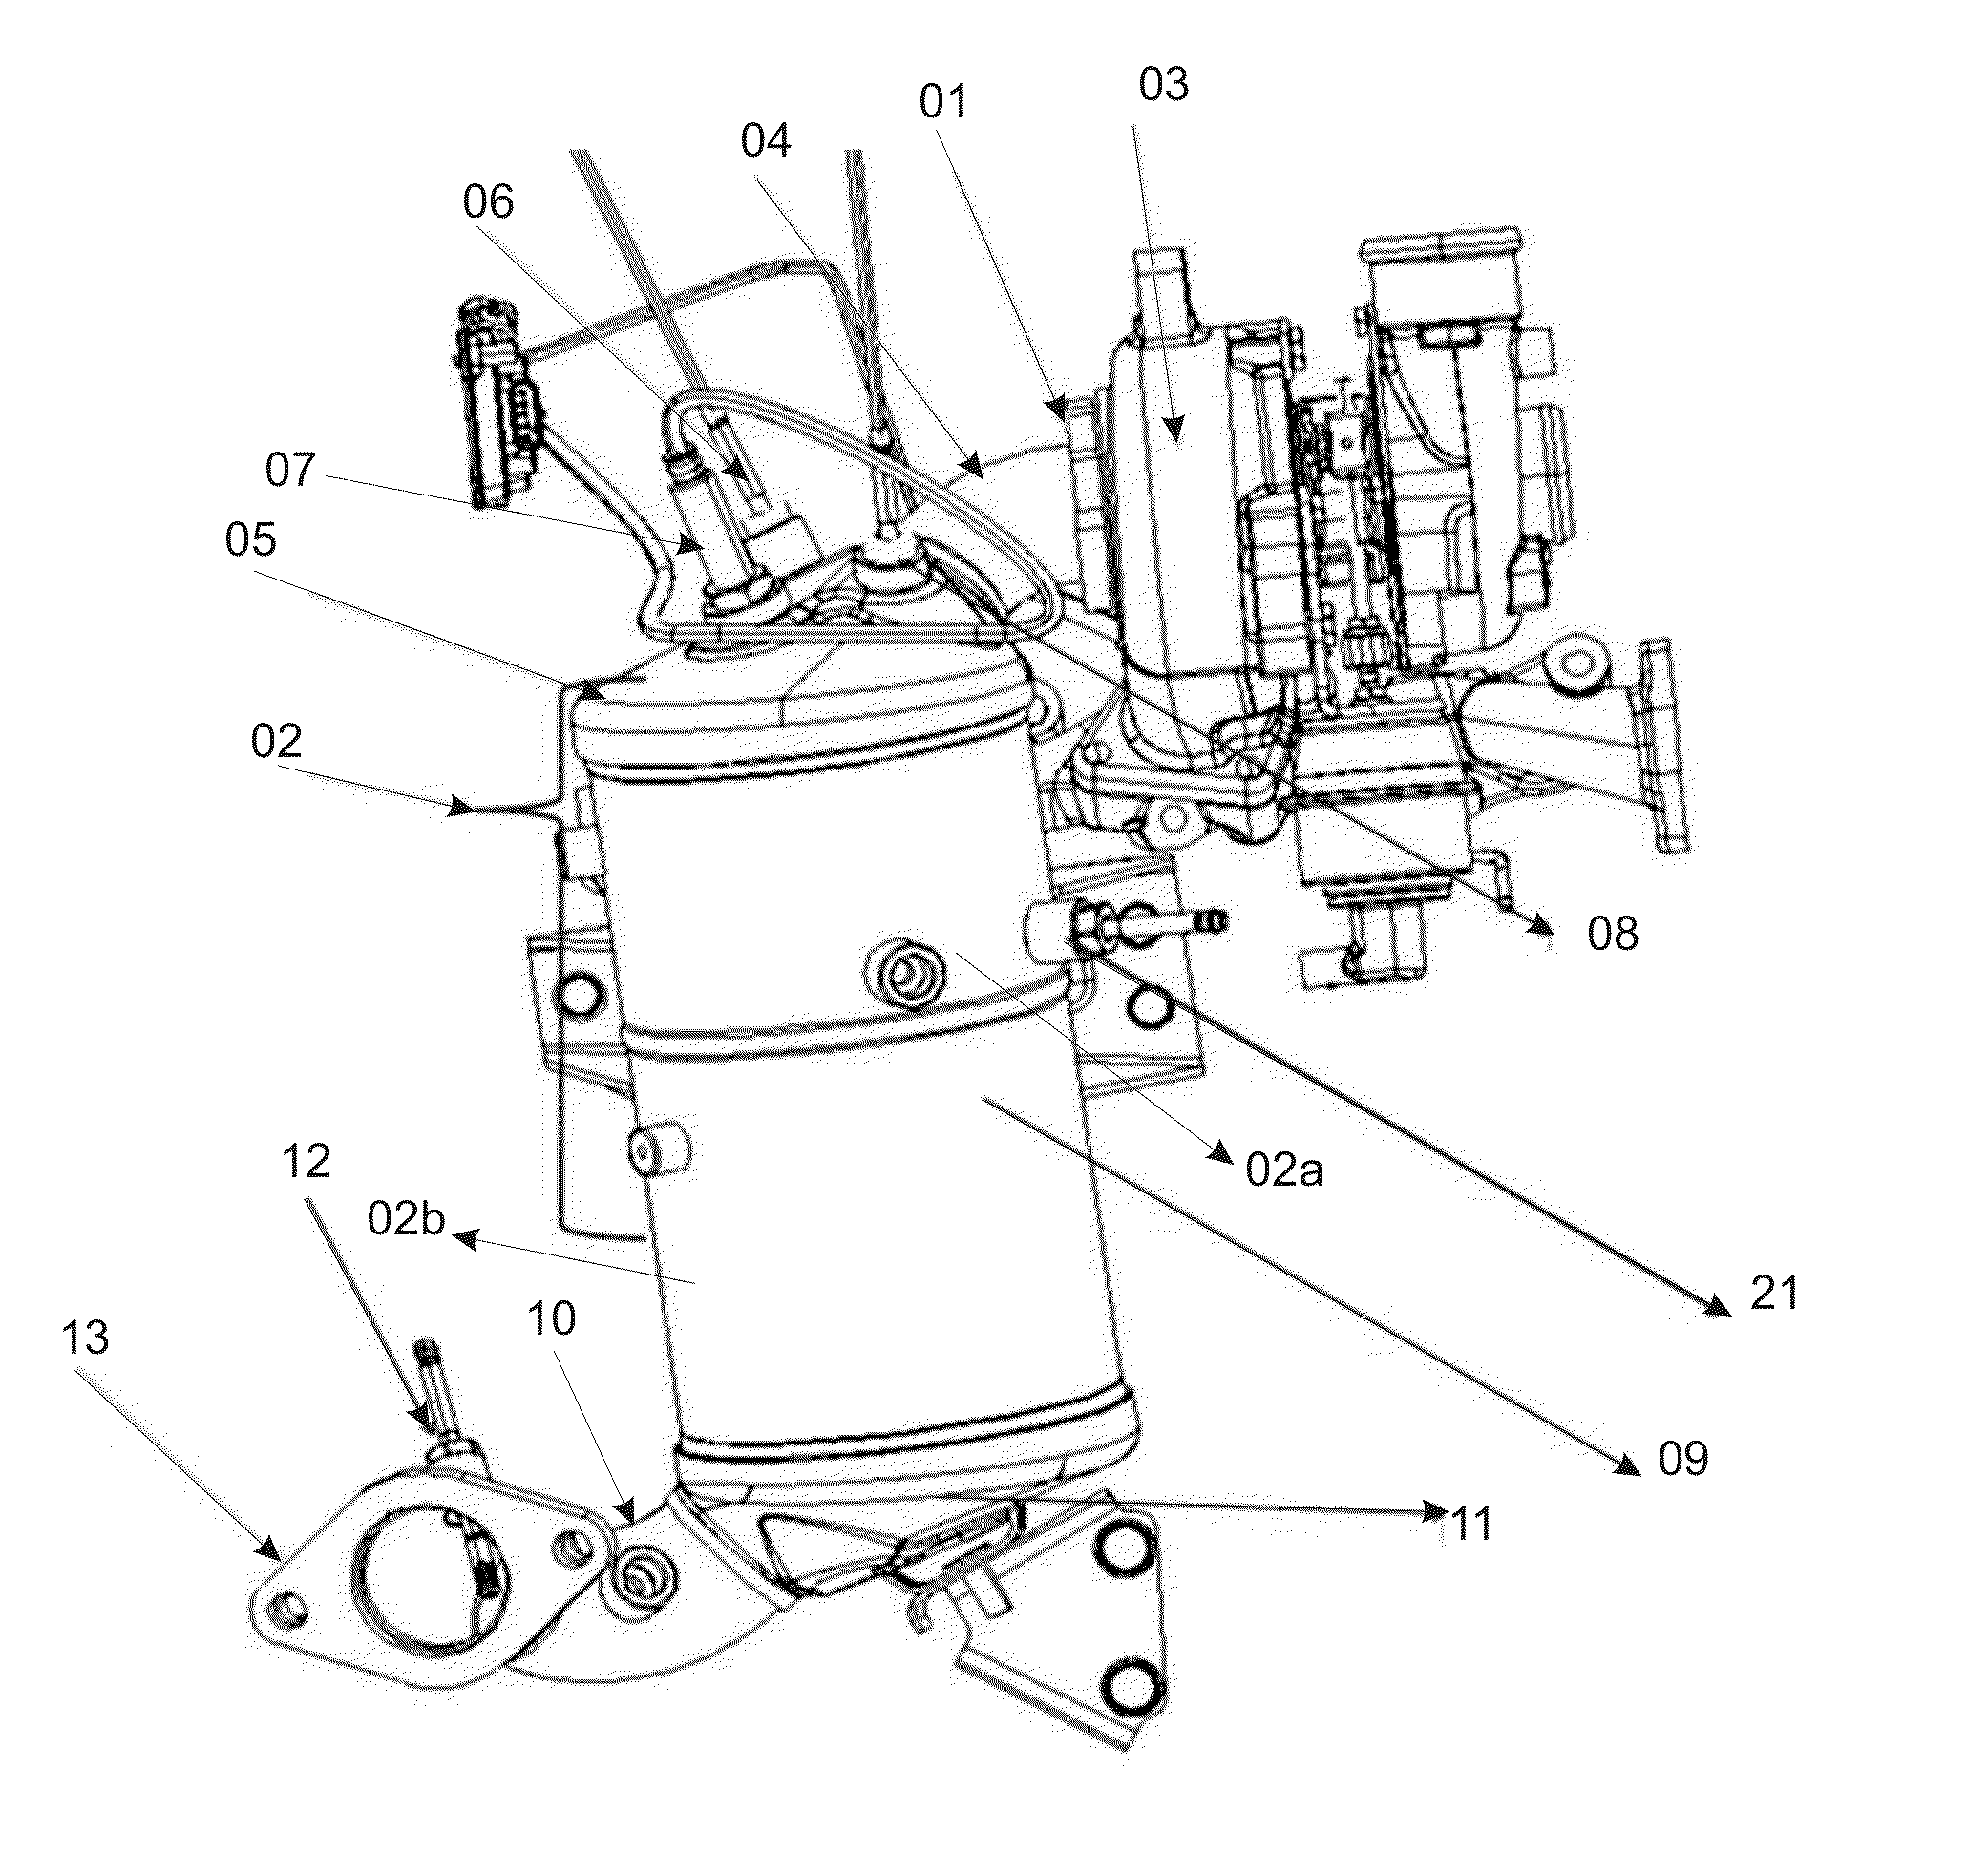 Integrated Exhaust Gas After-Treatment System for Diesel Fuel Engines